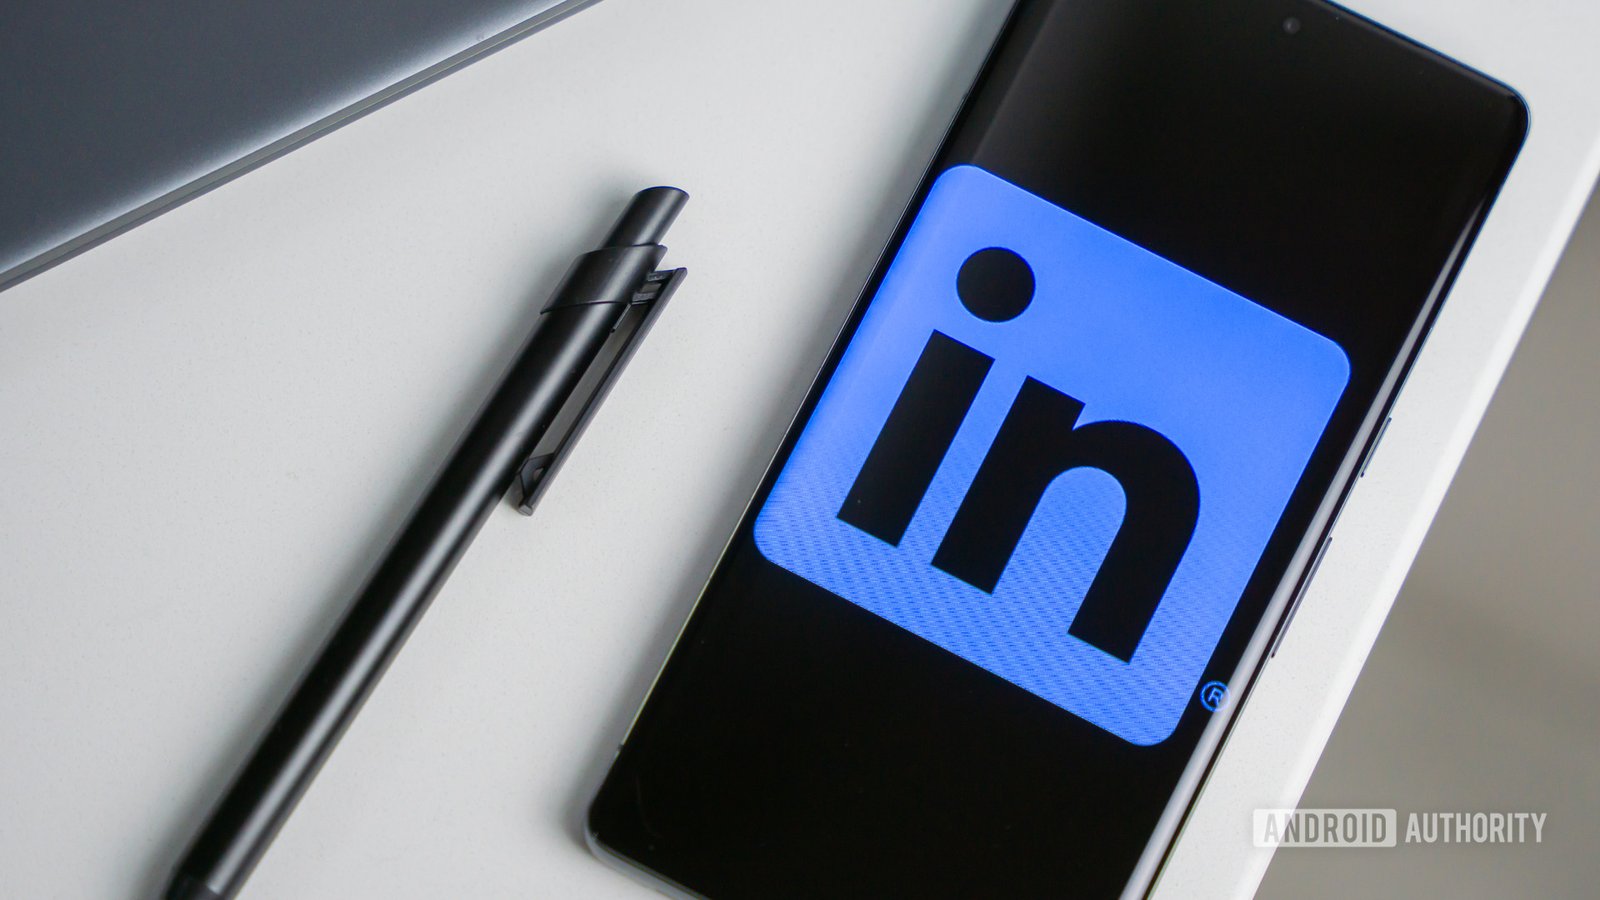 Games could soon come to LinkedIn, for some reason (APK teardown)